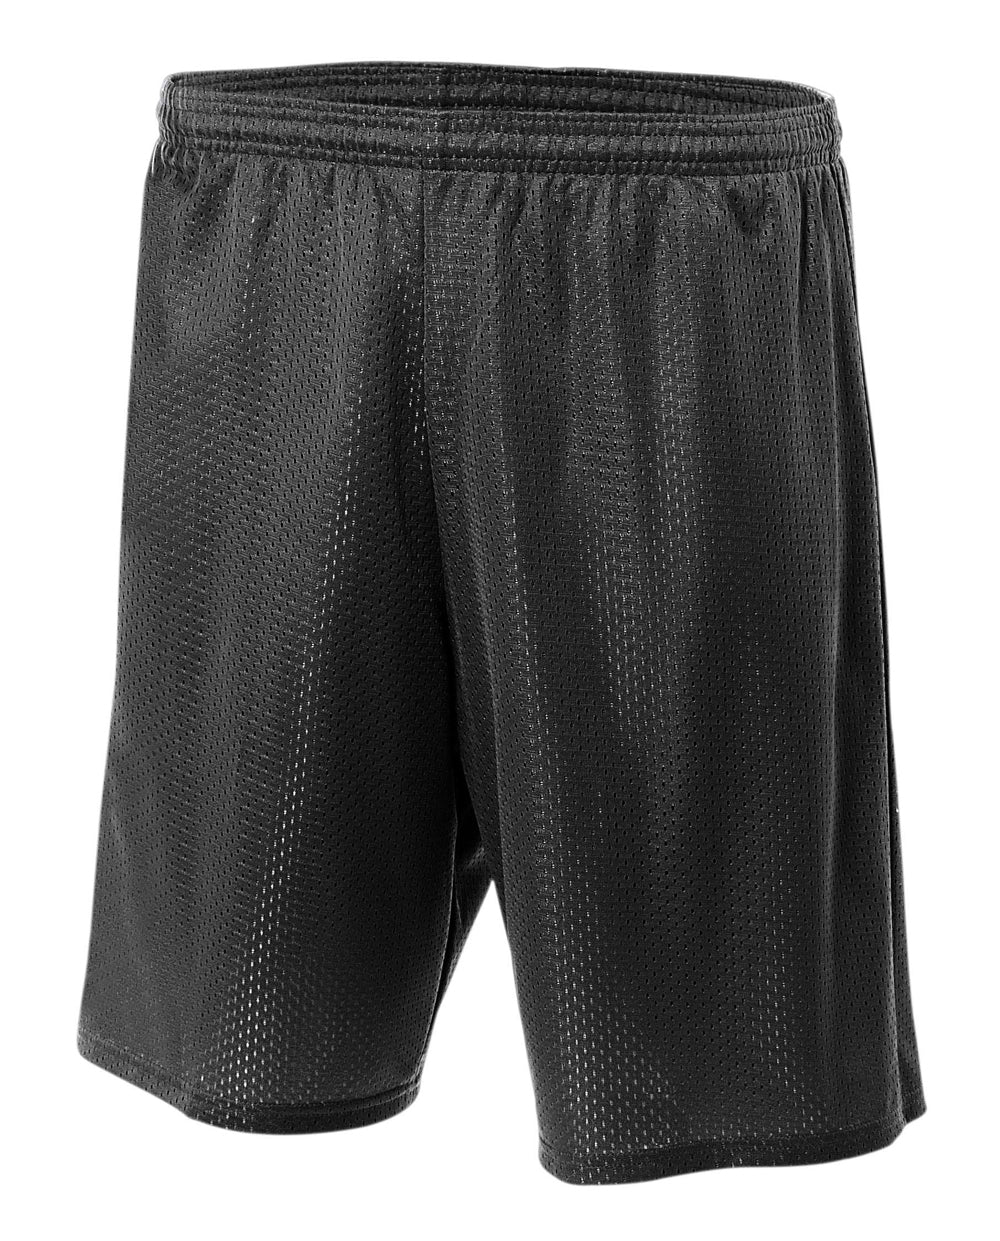 Black A4 Lined Tricot Mesh Shorts